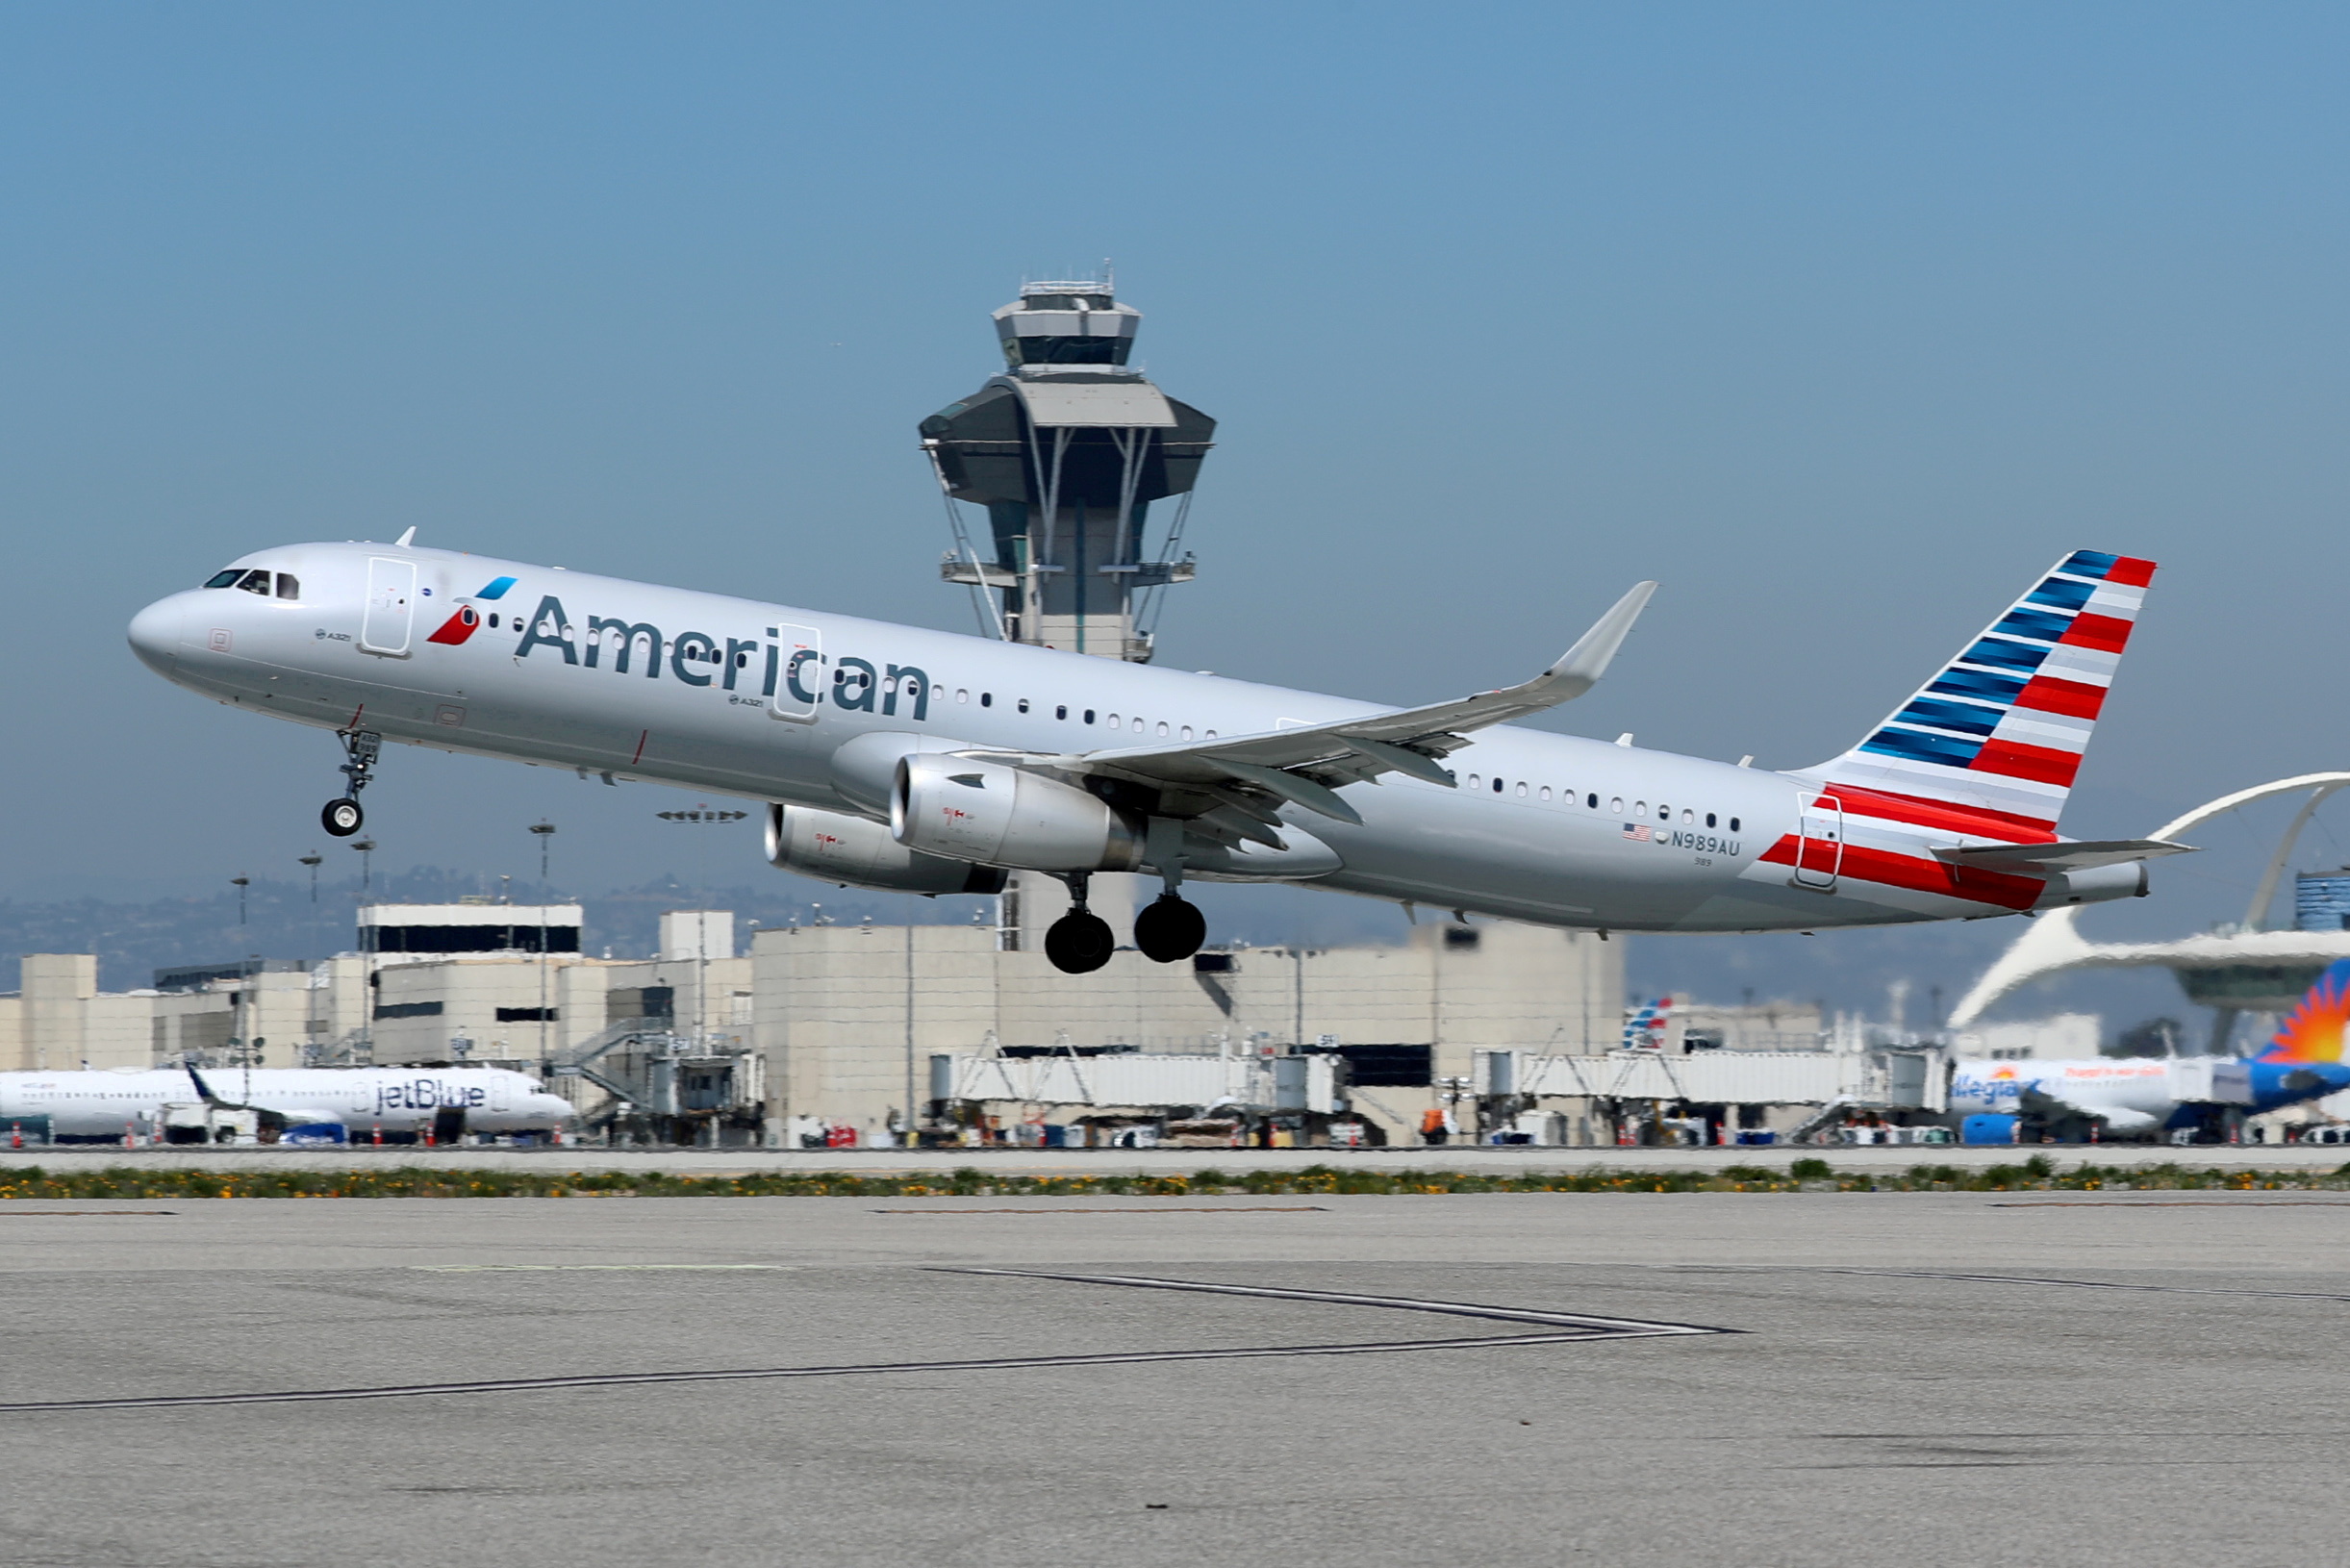 An American Airlines Airbus A321-200 plane takes off from Los Angeles International airport (LAX) in Los Angeles, California, U.S. March 28, 2018. REUTERS/Mike Blake/File Photo